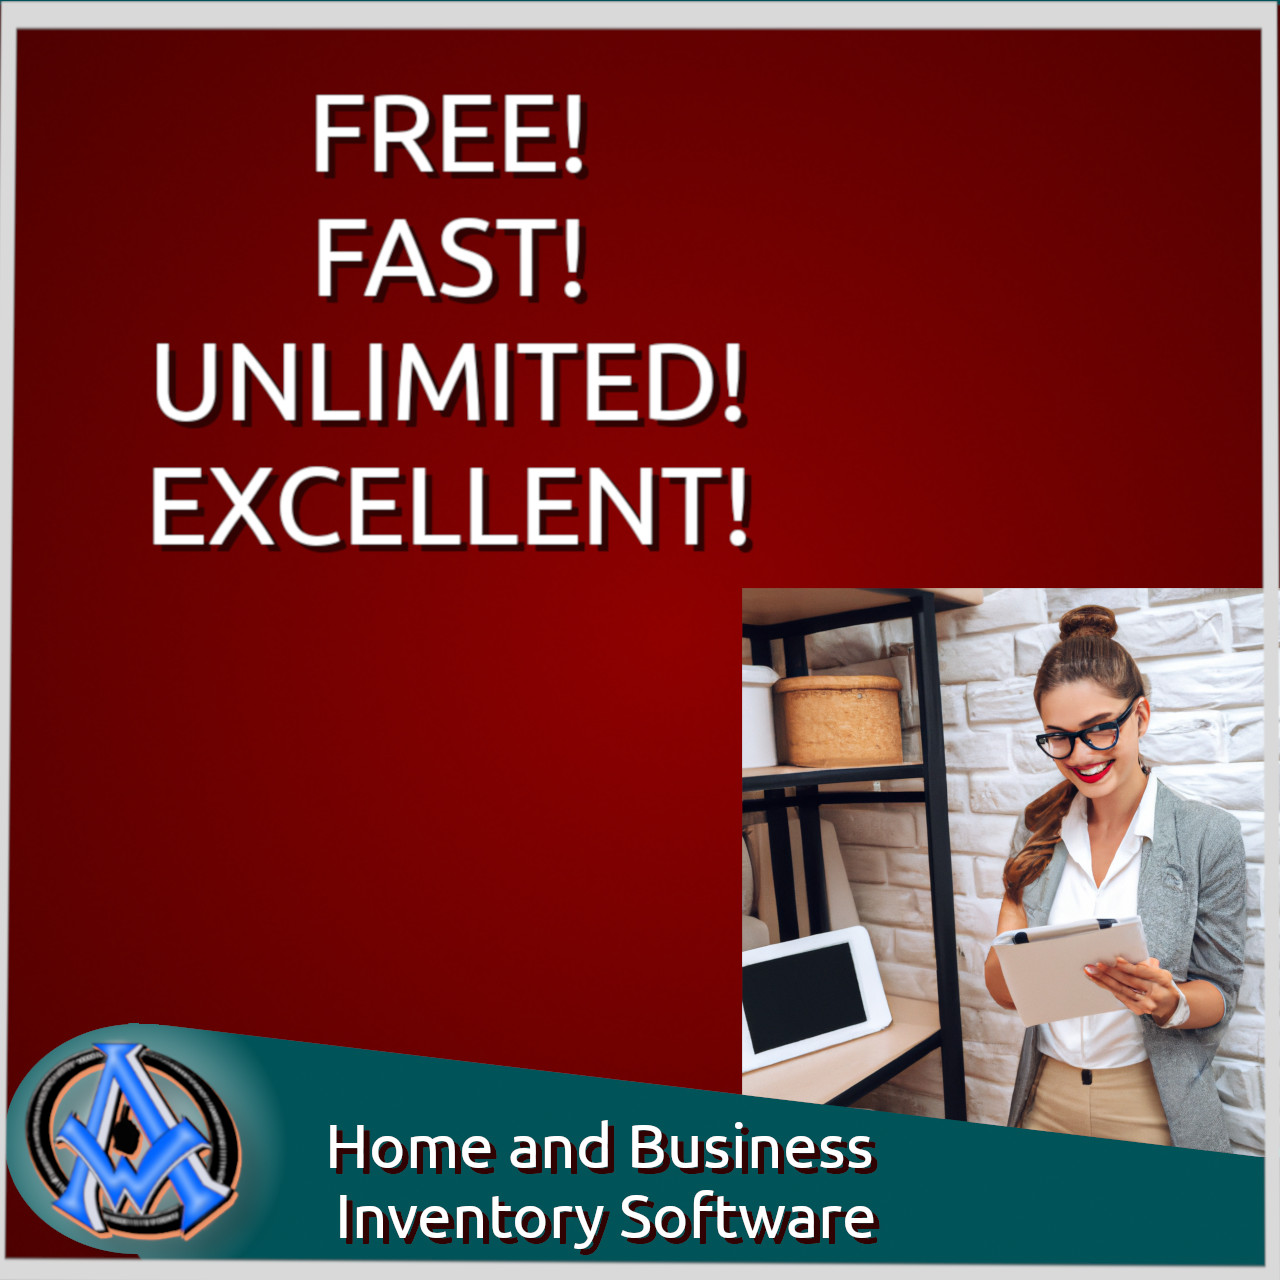 Free Home and Business Inventory Software1X1